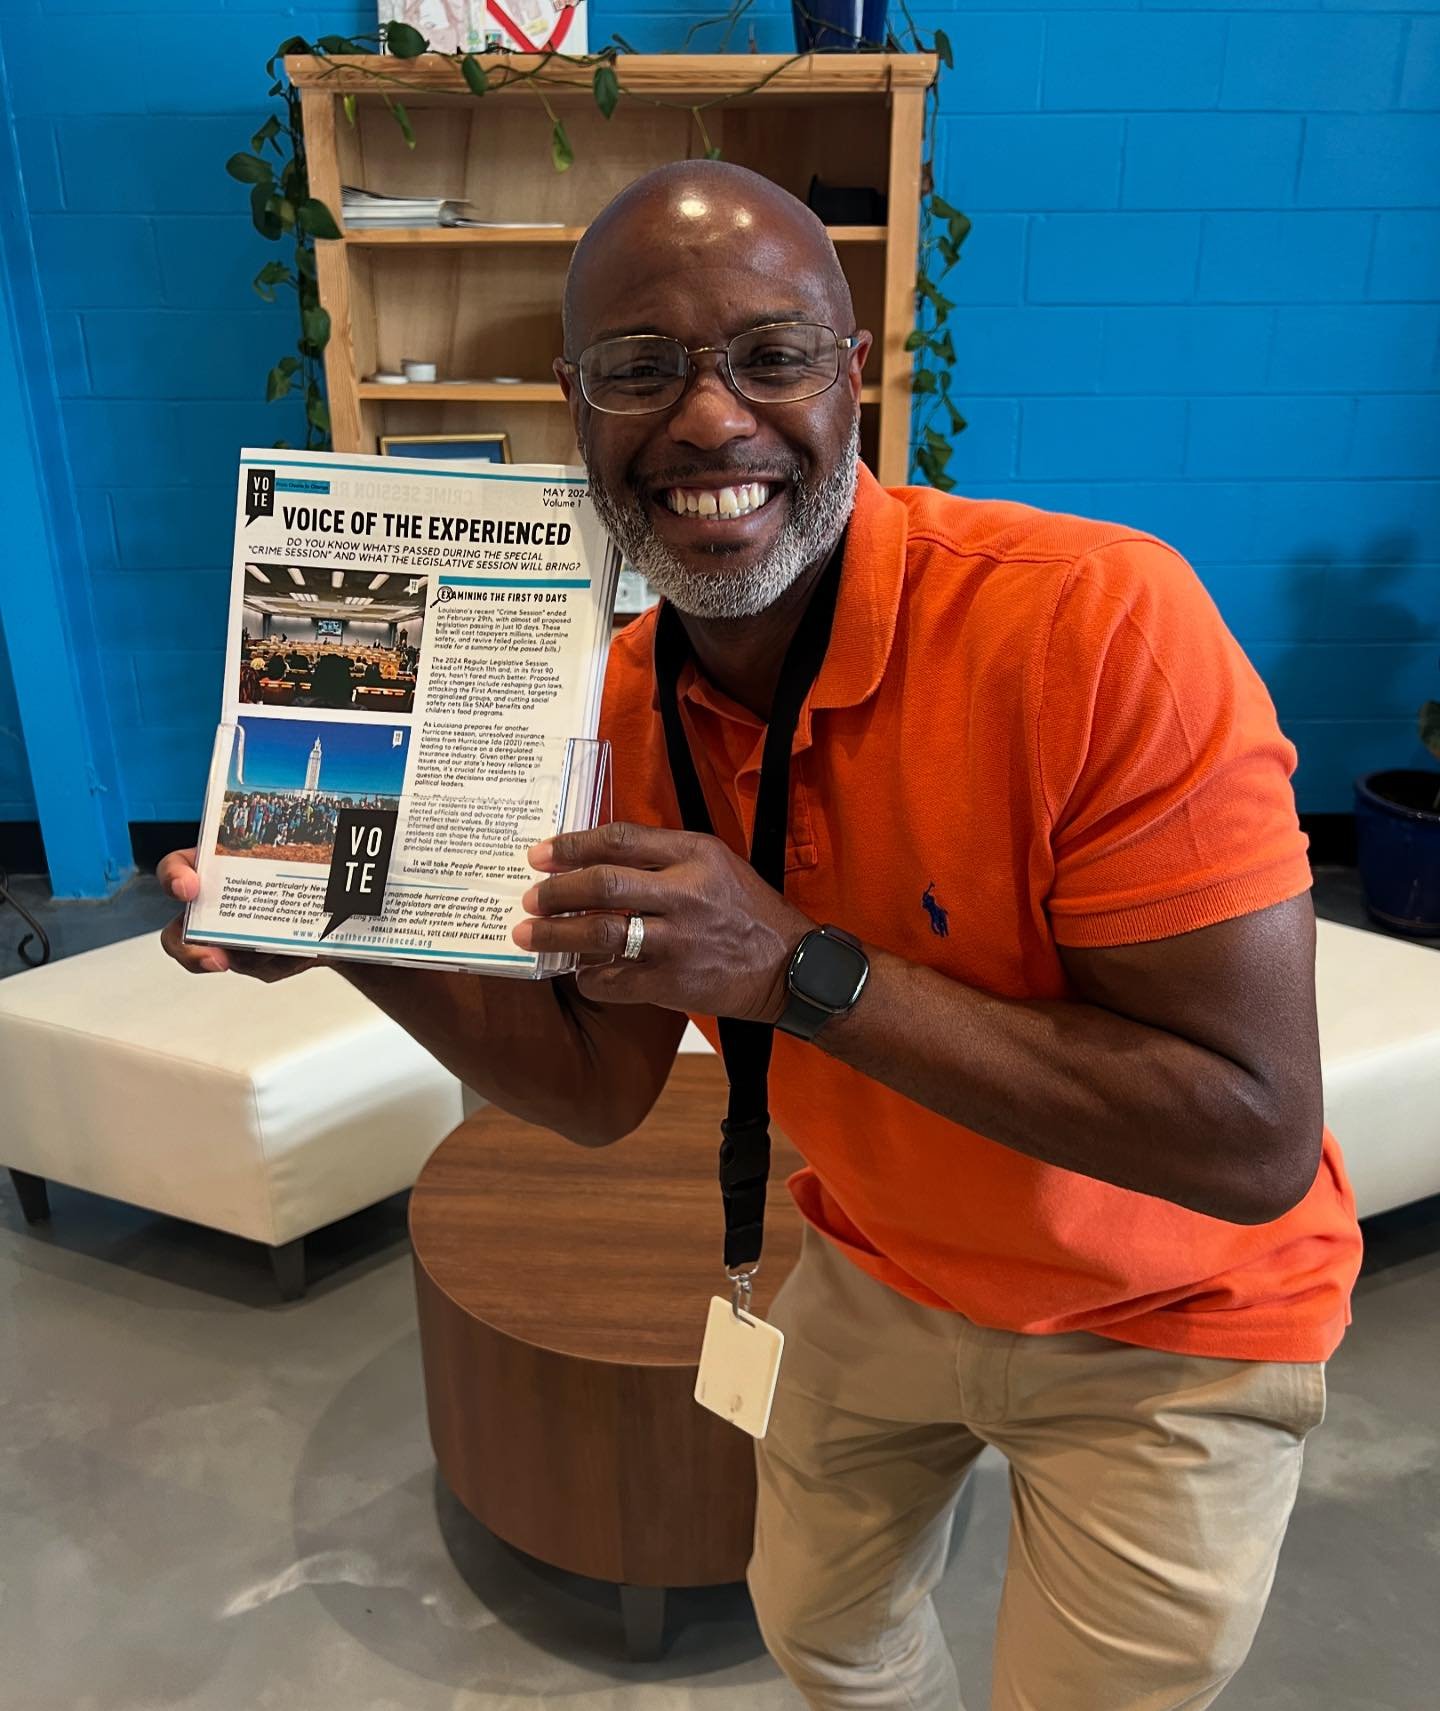 🚨📰 Exciting news&hellip; our VOTE community newsletter and exclusive branded holders are here! 📰🚨

Love our digital updates? Just wait til you see us in 4D 🗞️💥. Our newsletters are perfect for sharing in local hotspots, community spaces, small 